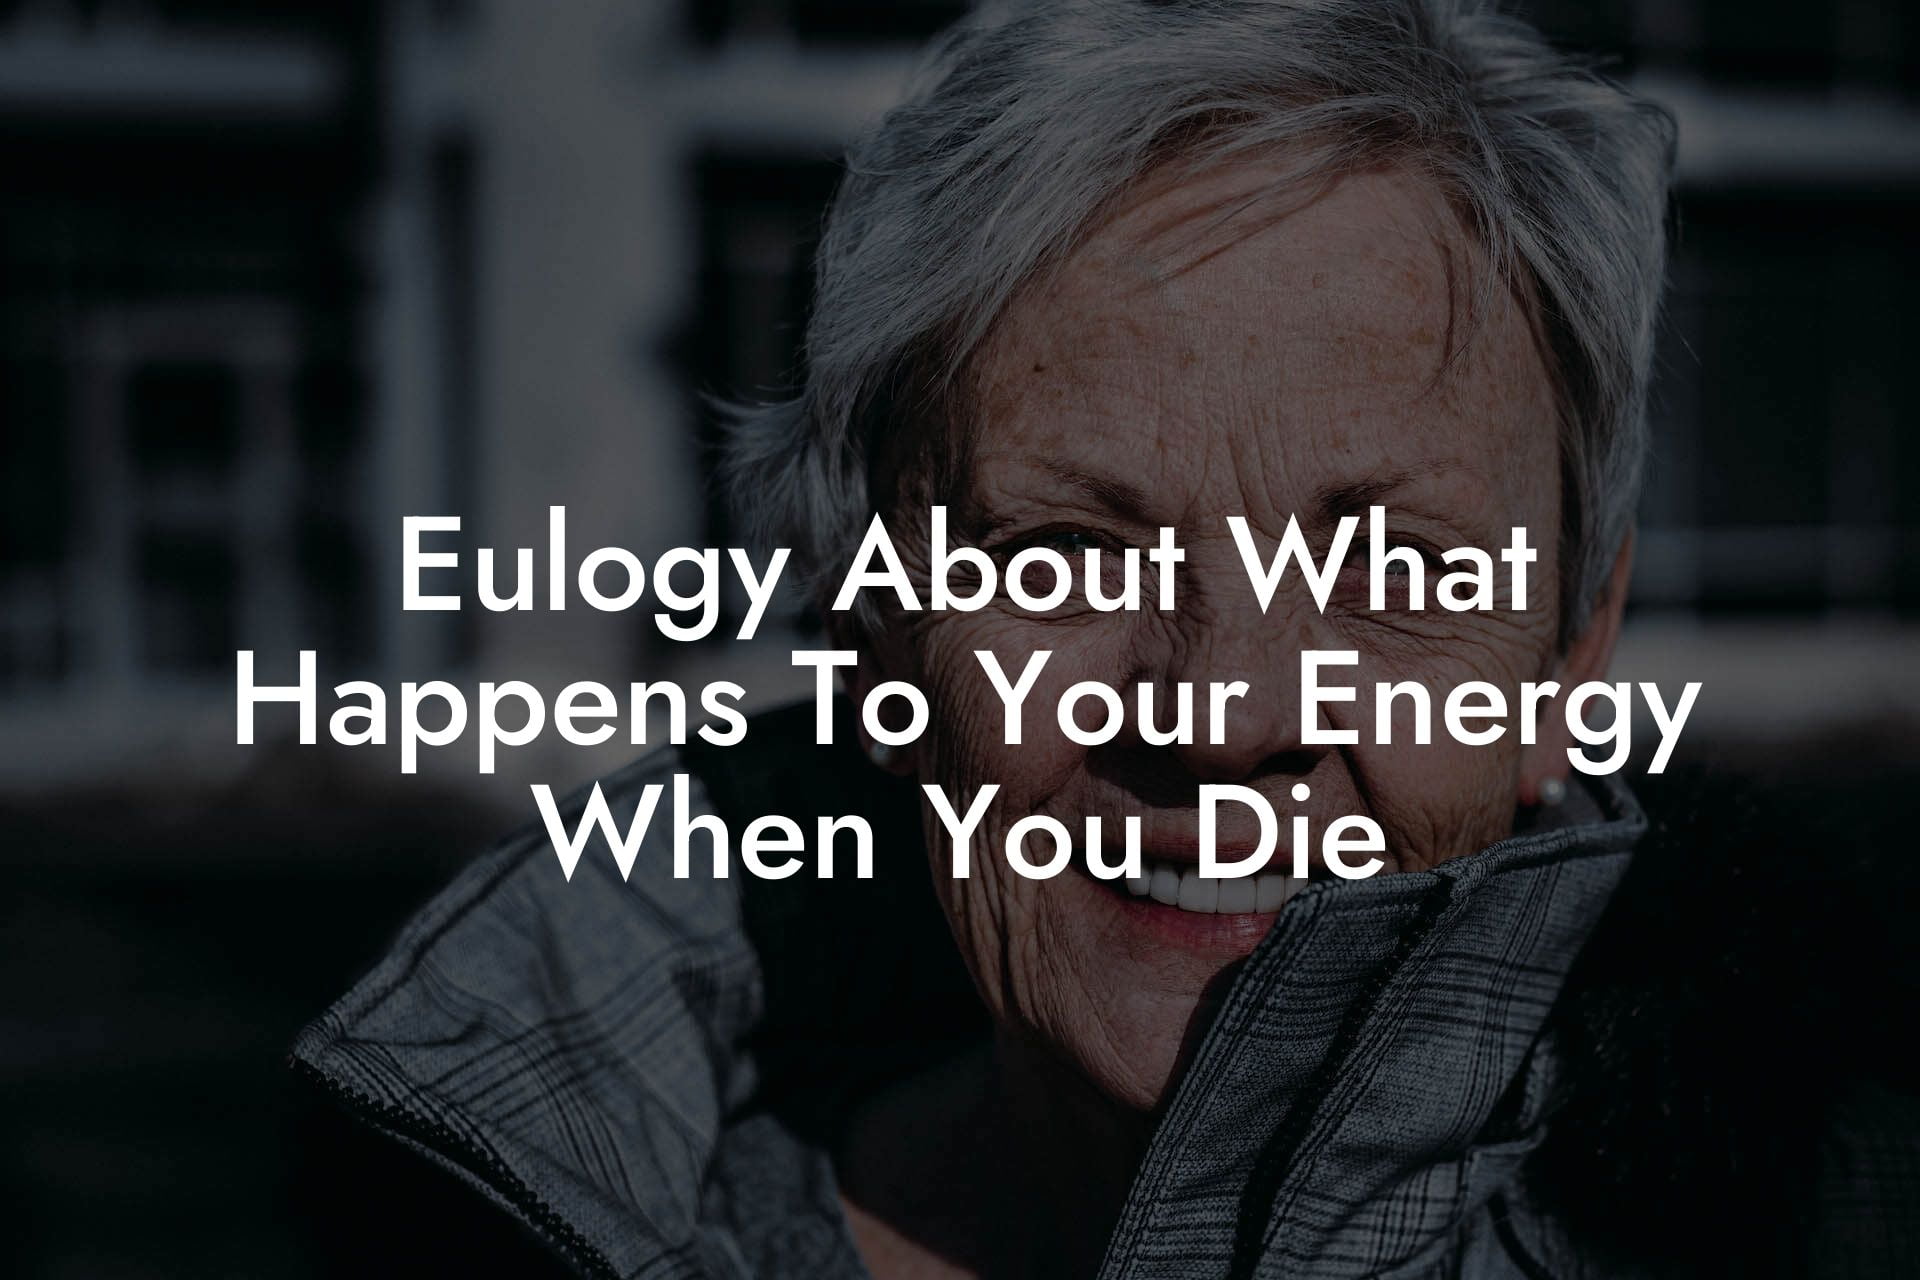 Eulogy About What Happens To Your Energy When You Die